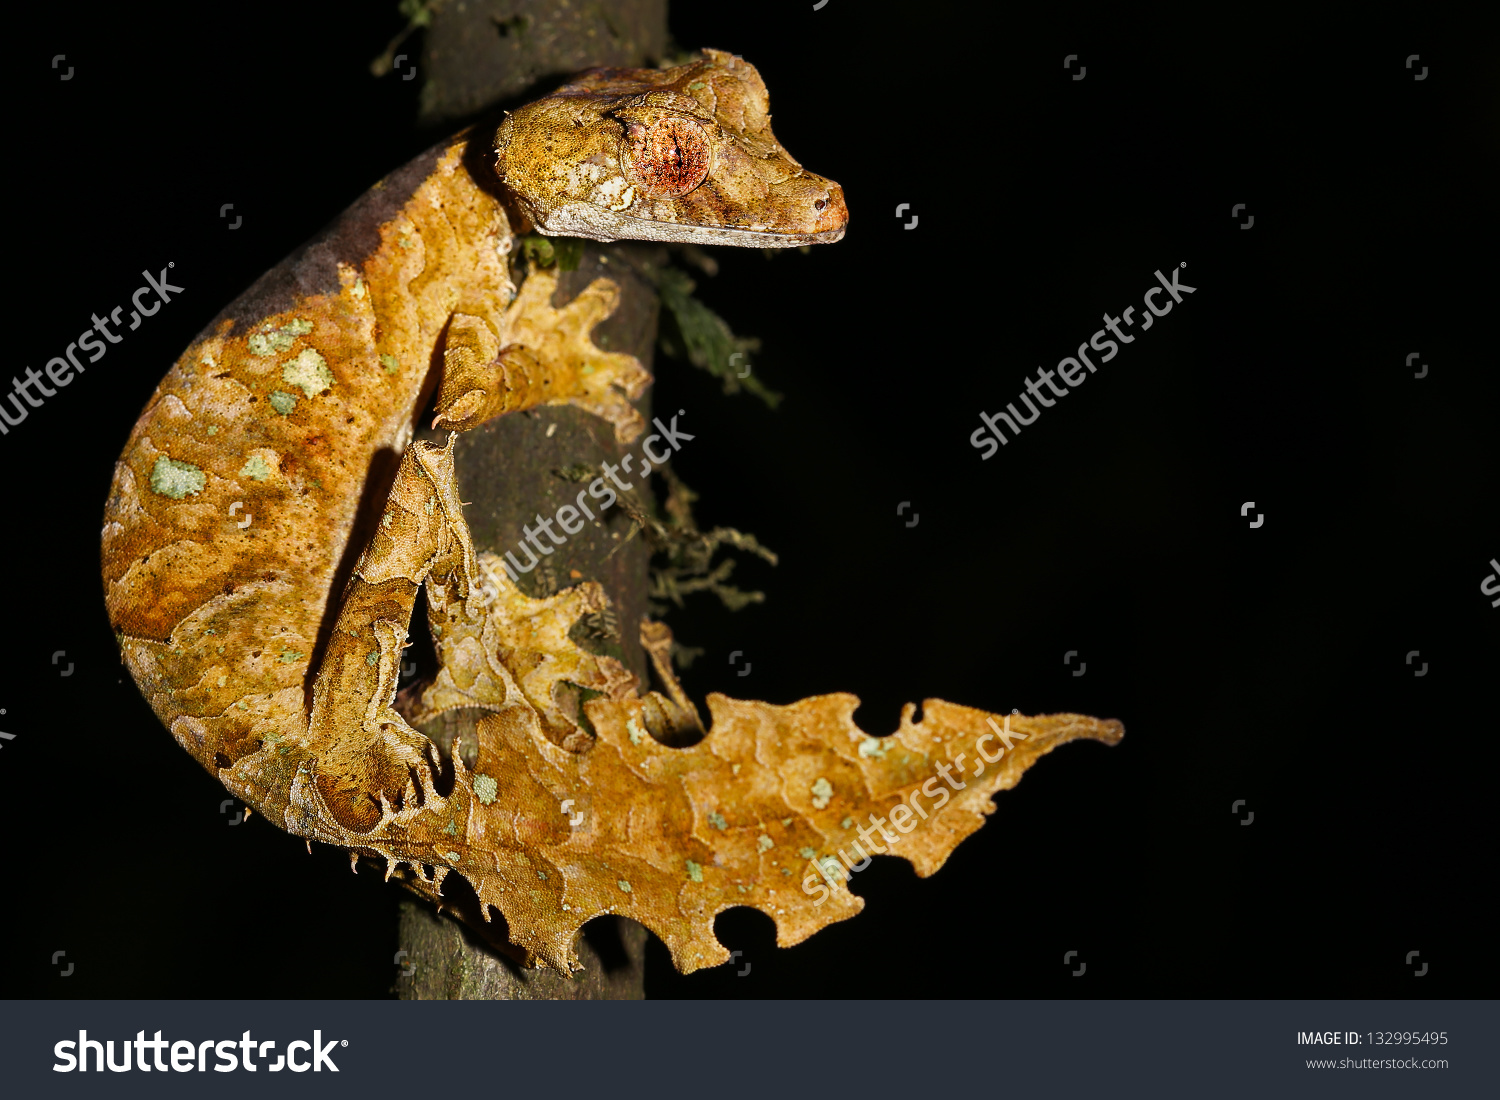 Satanic Leaf-tailed Gecko clipart #10, Download drawings